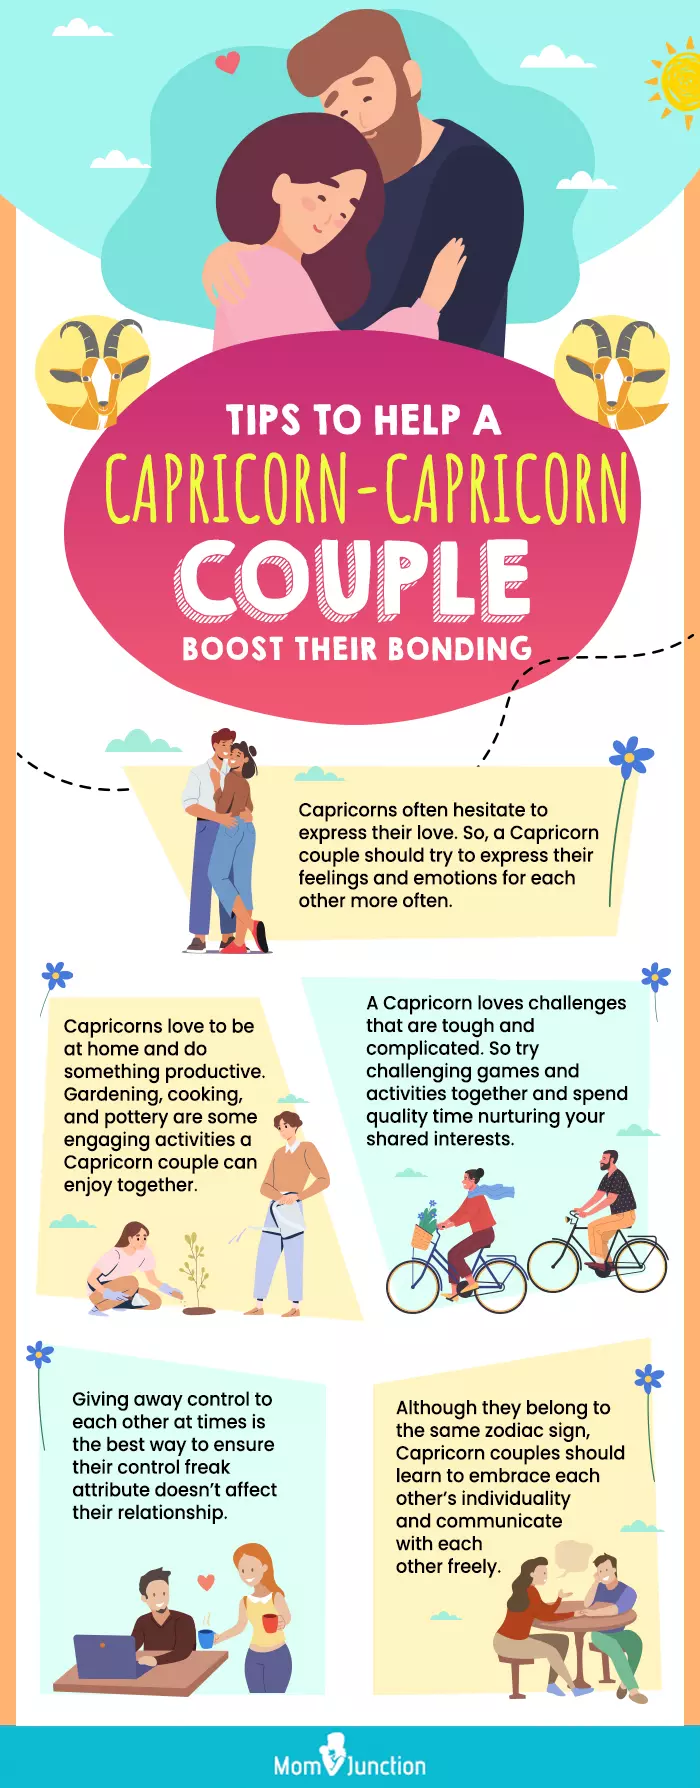 tips to help a capricorn capricorn couple boost their bonding (infographic)